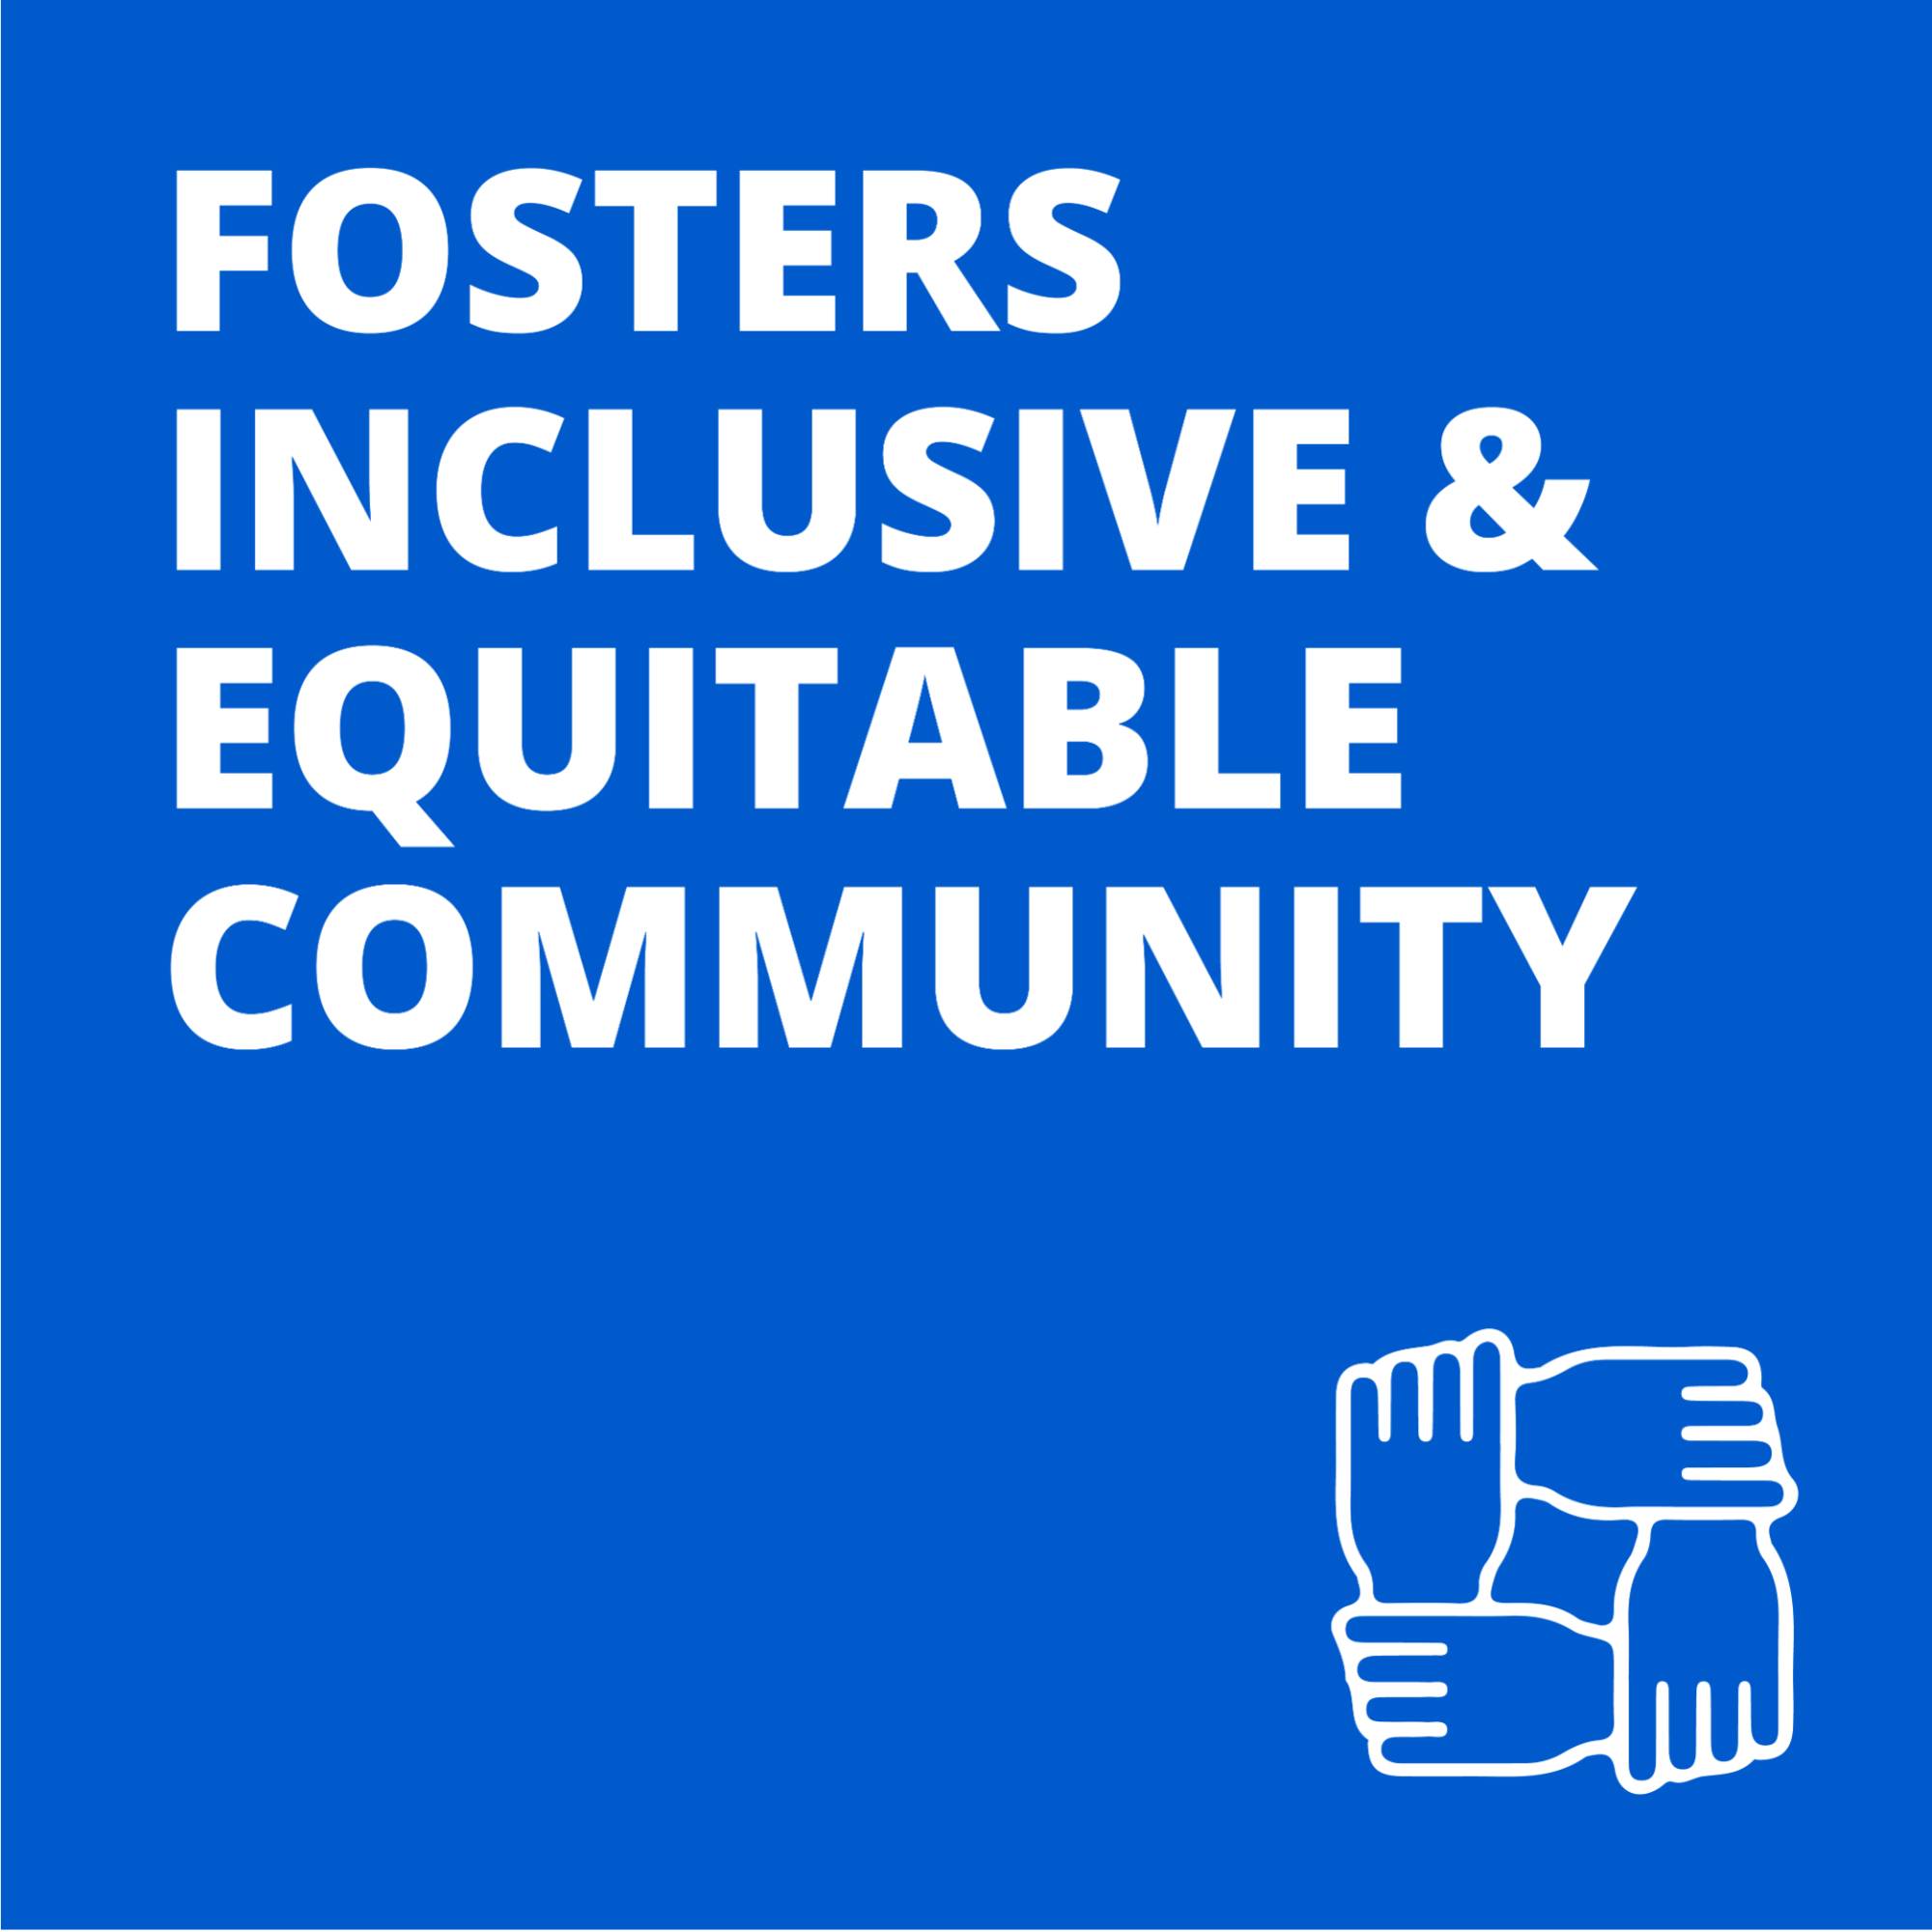 "Fosters Inclusive and Equitable Community" text with hand holding icon